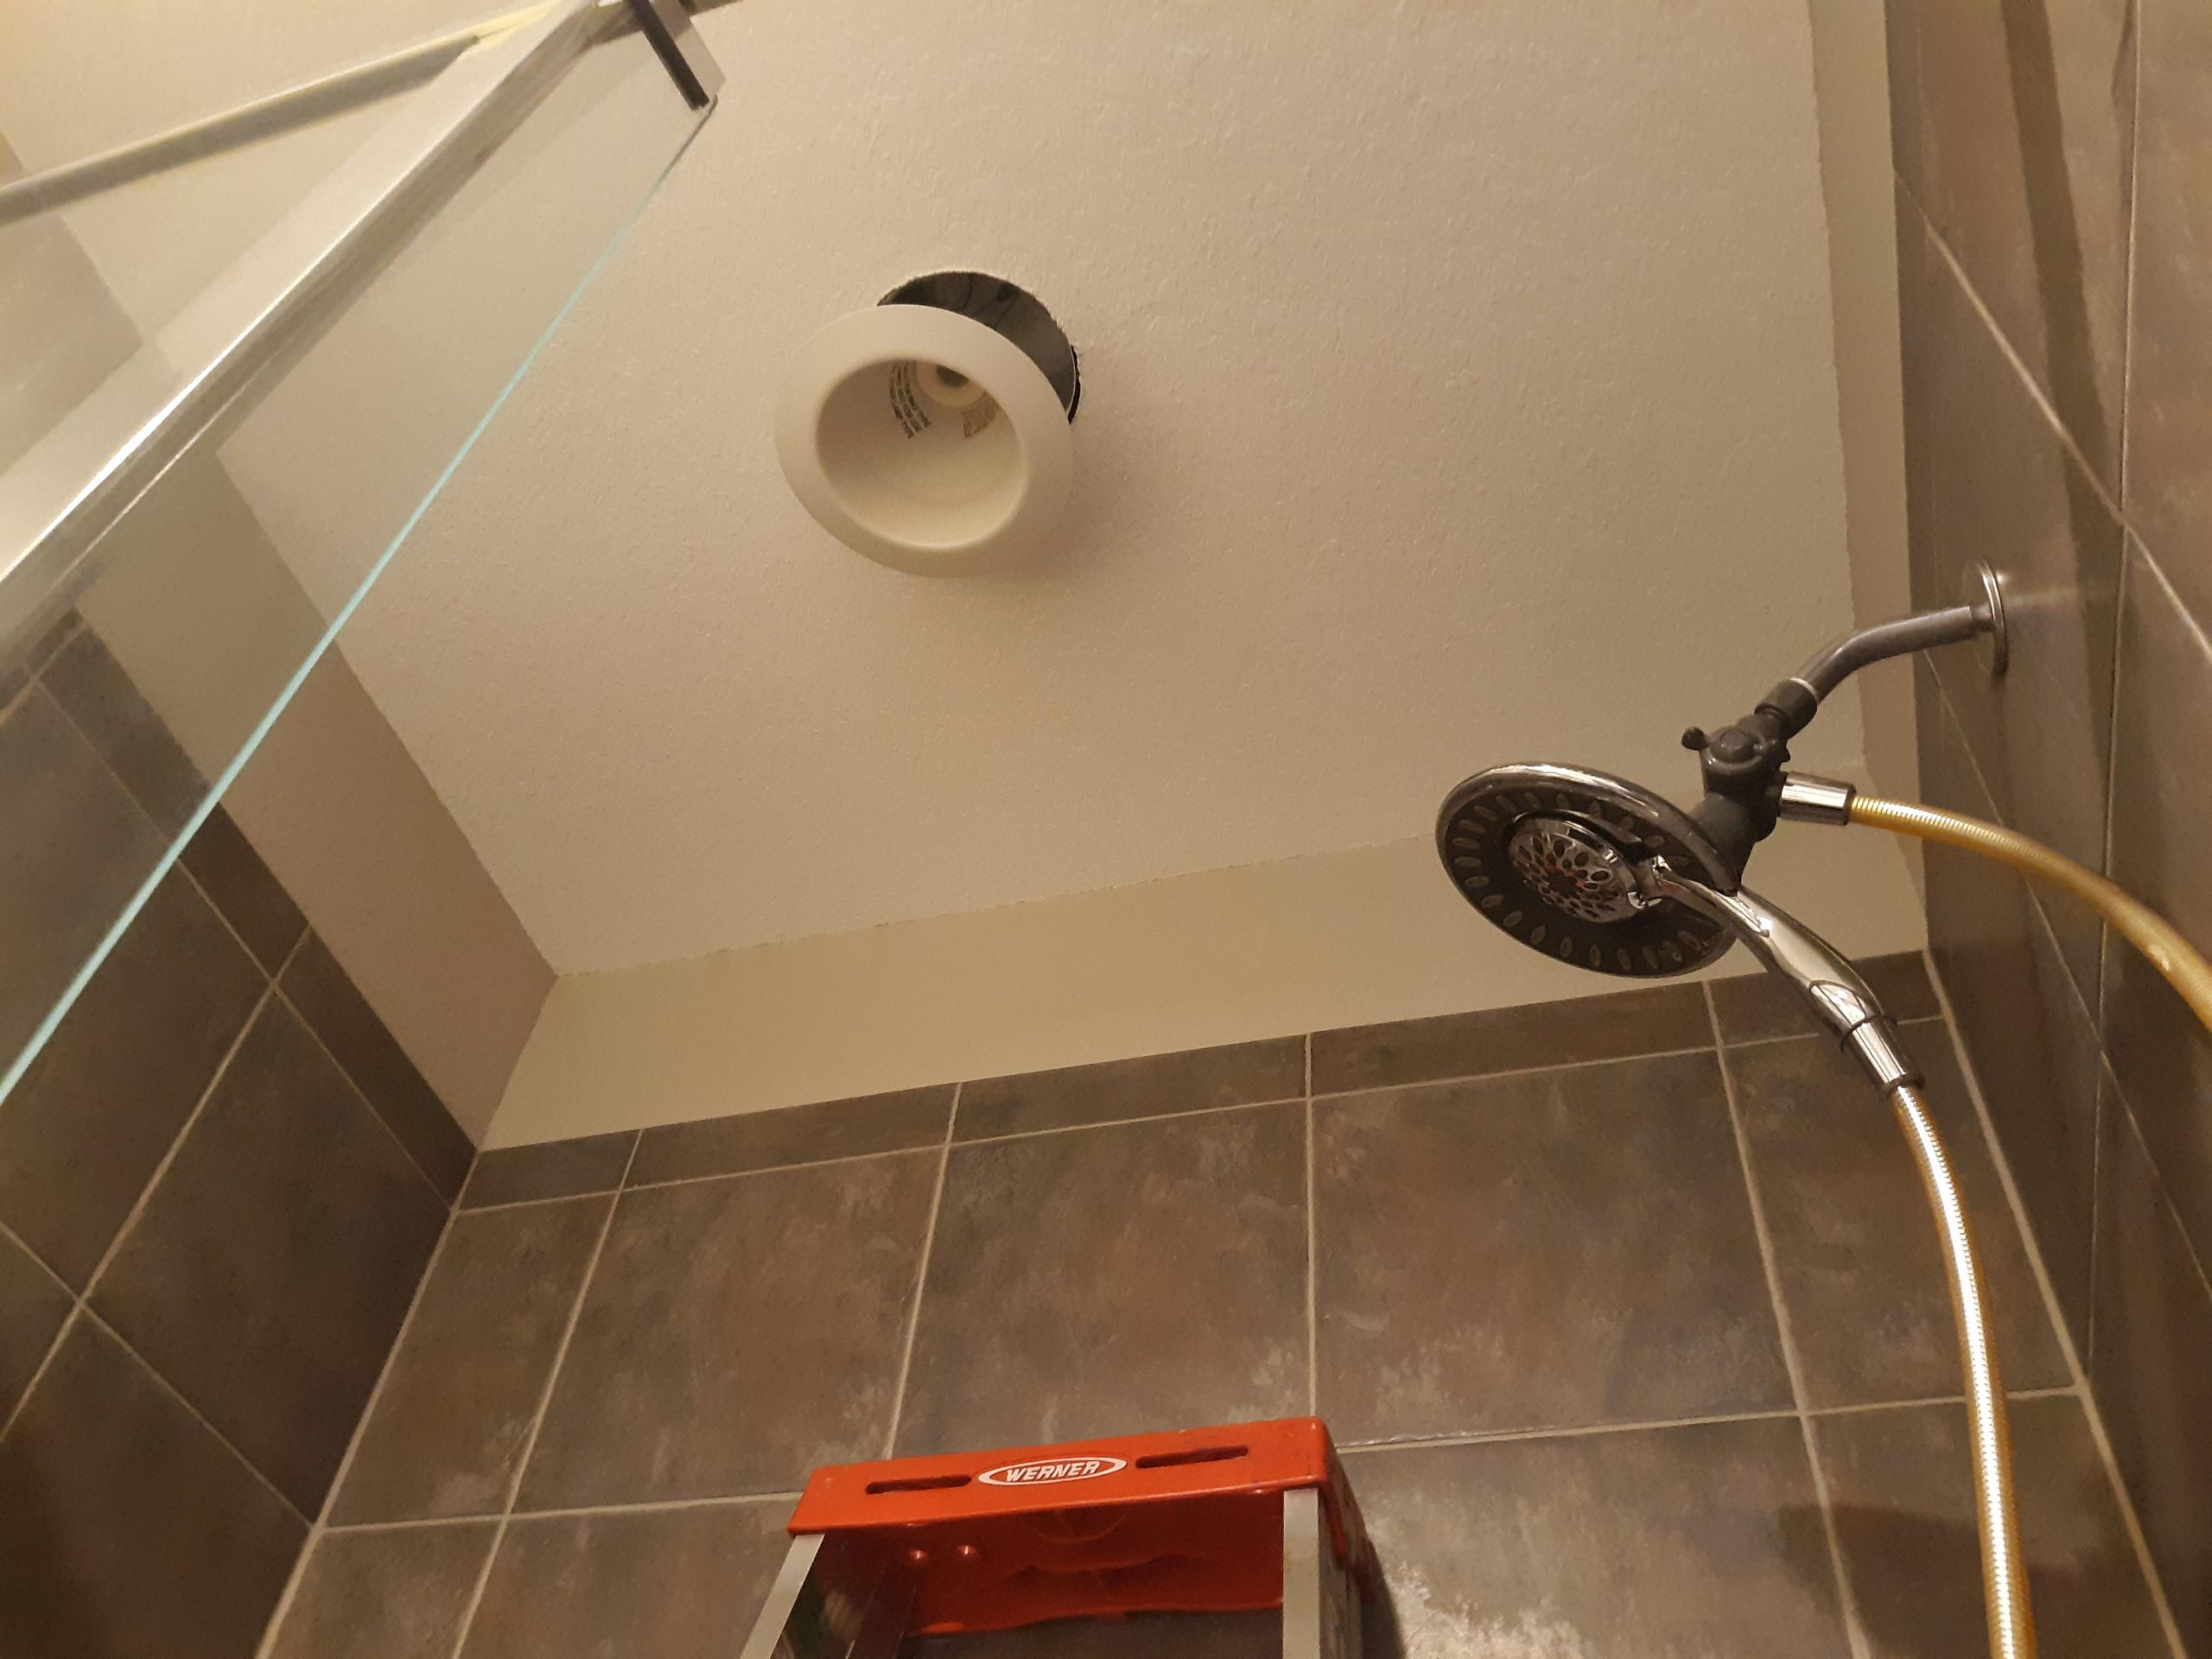 Customer Wanted Ceiling Fan In Shower With No Ground Wire in size 4128 X 3096